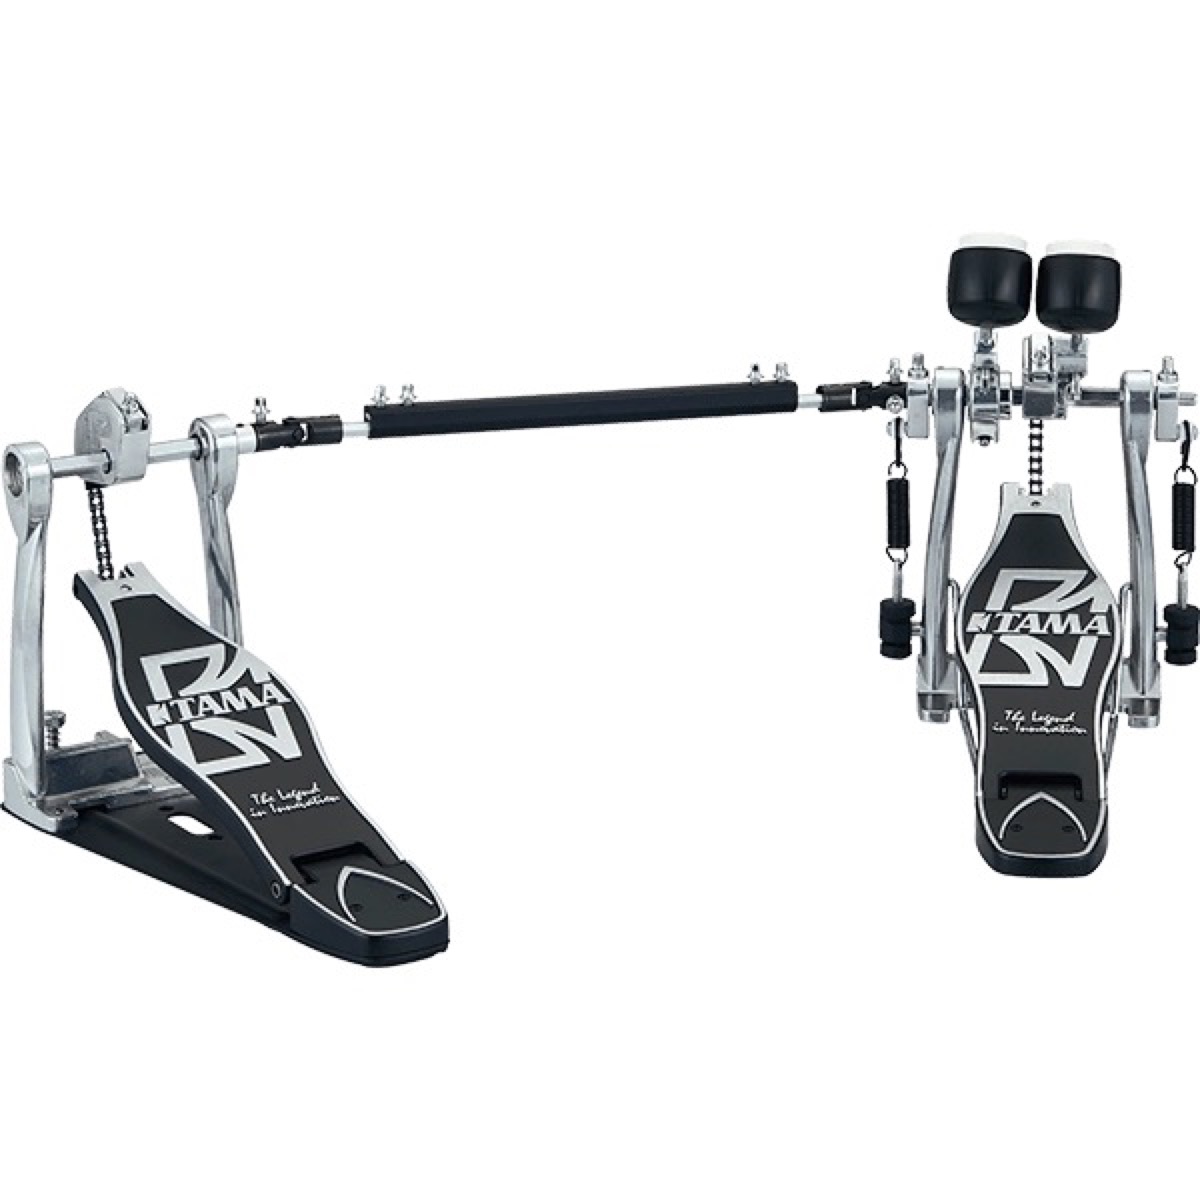 Tama HP30TW Double Bass Pedal Drum Pedal